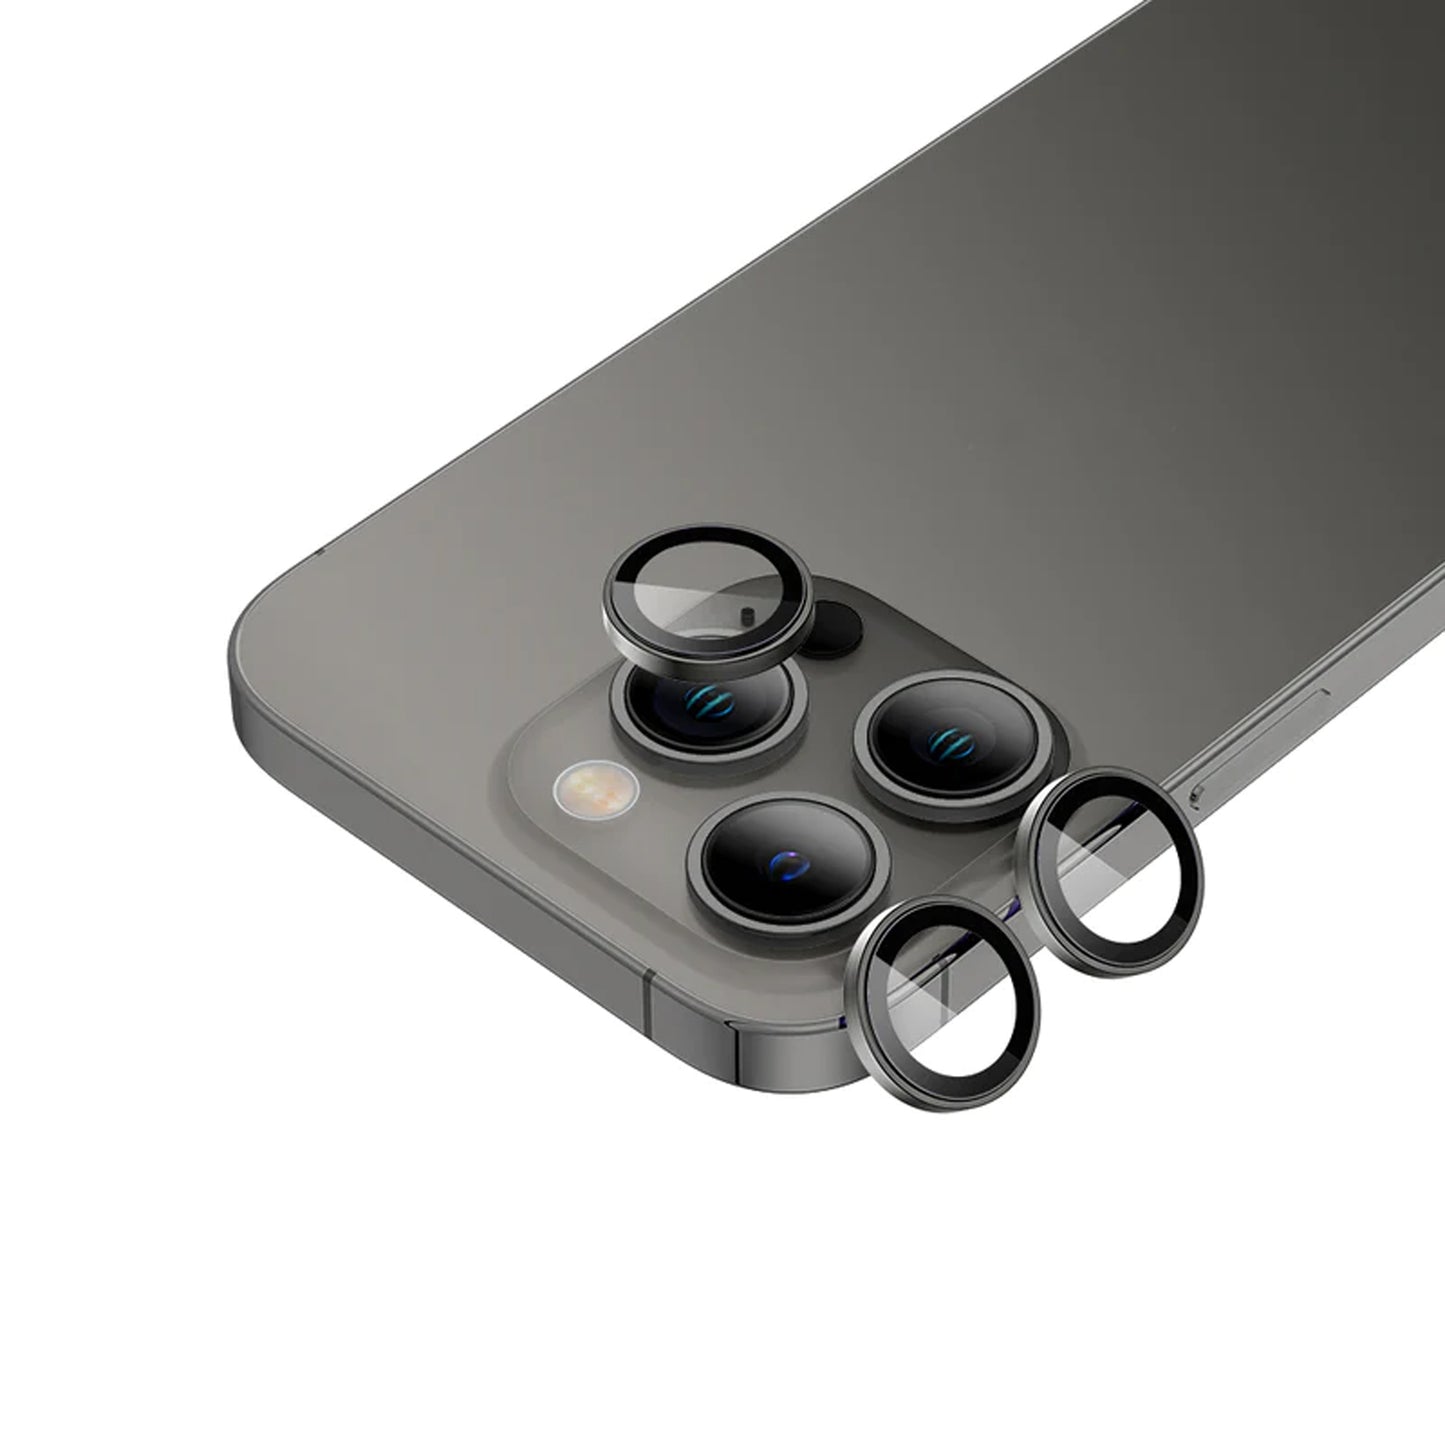 Amazingthing Lens Protector for iPhone 14 Pro - 14 Pro Max - Gray (Barcode: 4892878076074 )